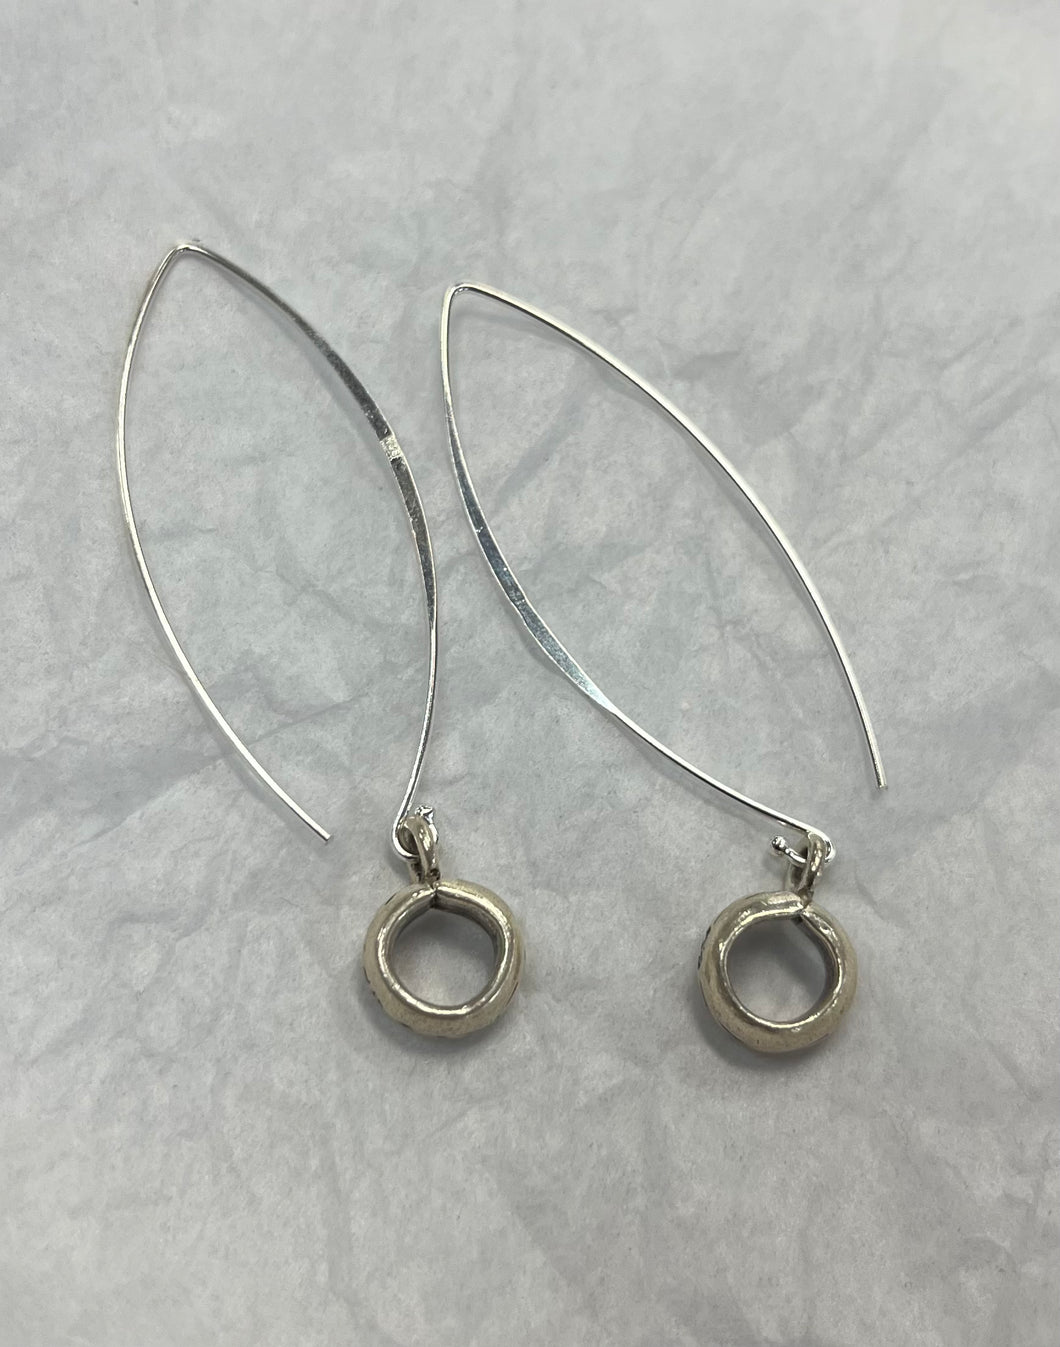 Handcrafted Dangle Silver Earring with Silver Bead